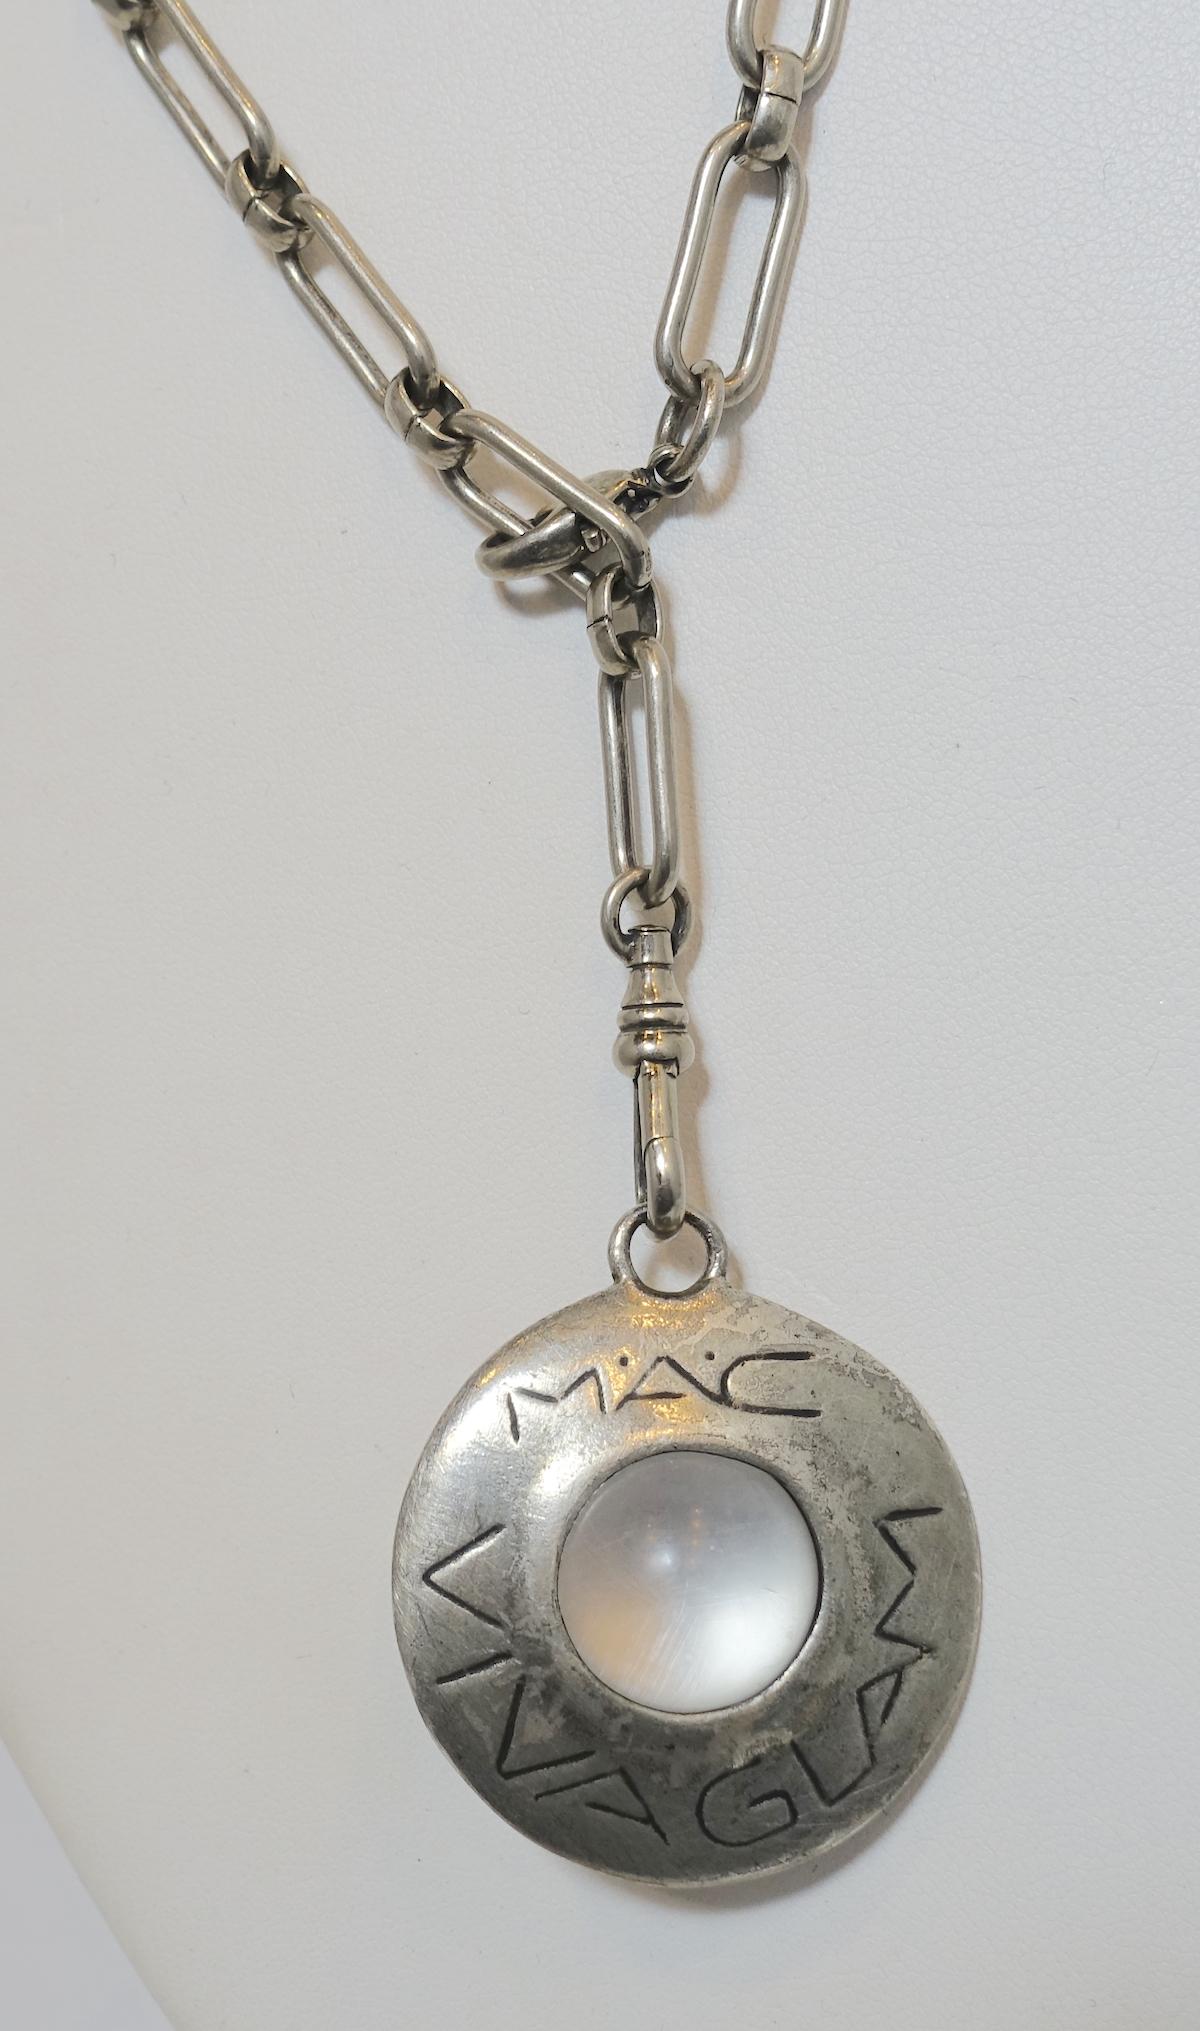 This vintage signed Mac Viva Glam 96 necklace features a pendant with a clear crystal ball center with a large link chain.  The pendant measures 1-3/8” across and the chain is 22” with a spring closure.  In excellent condition, the pendant is signed